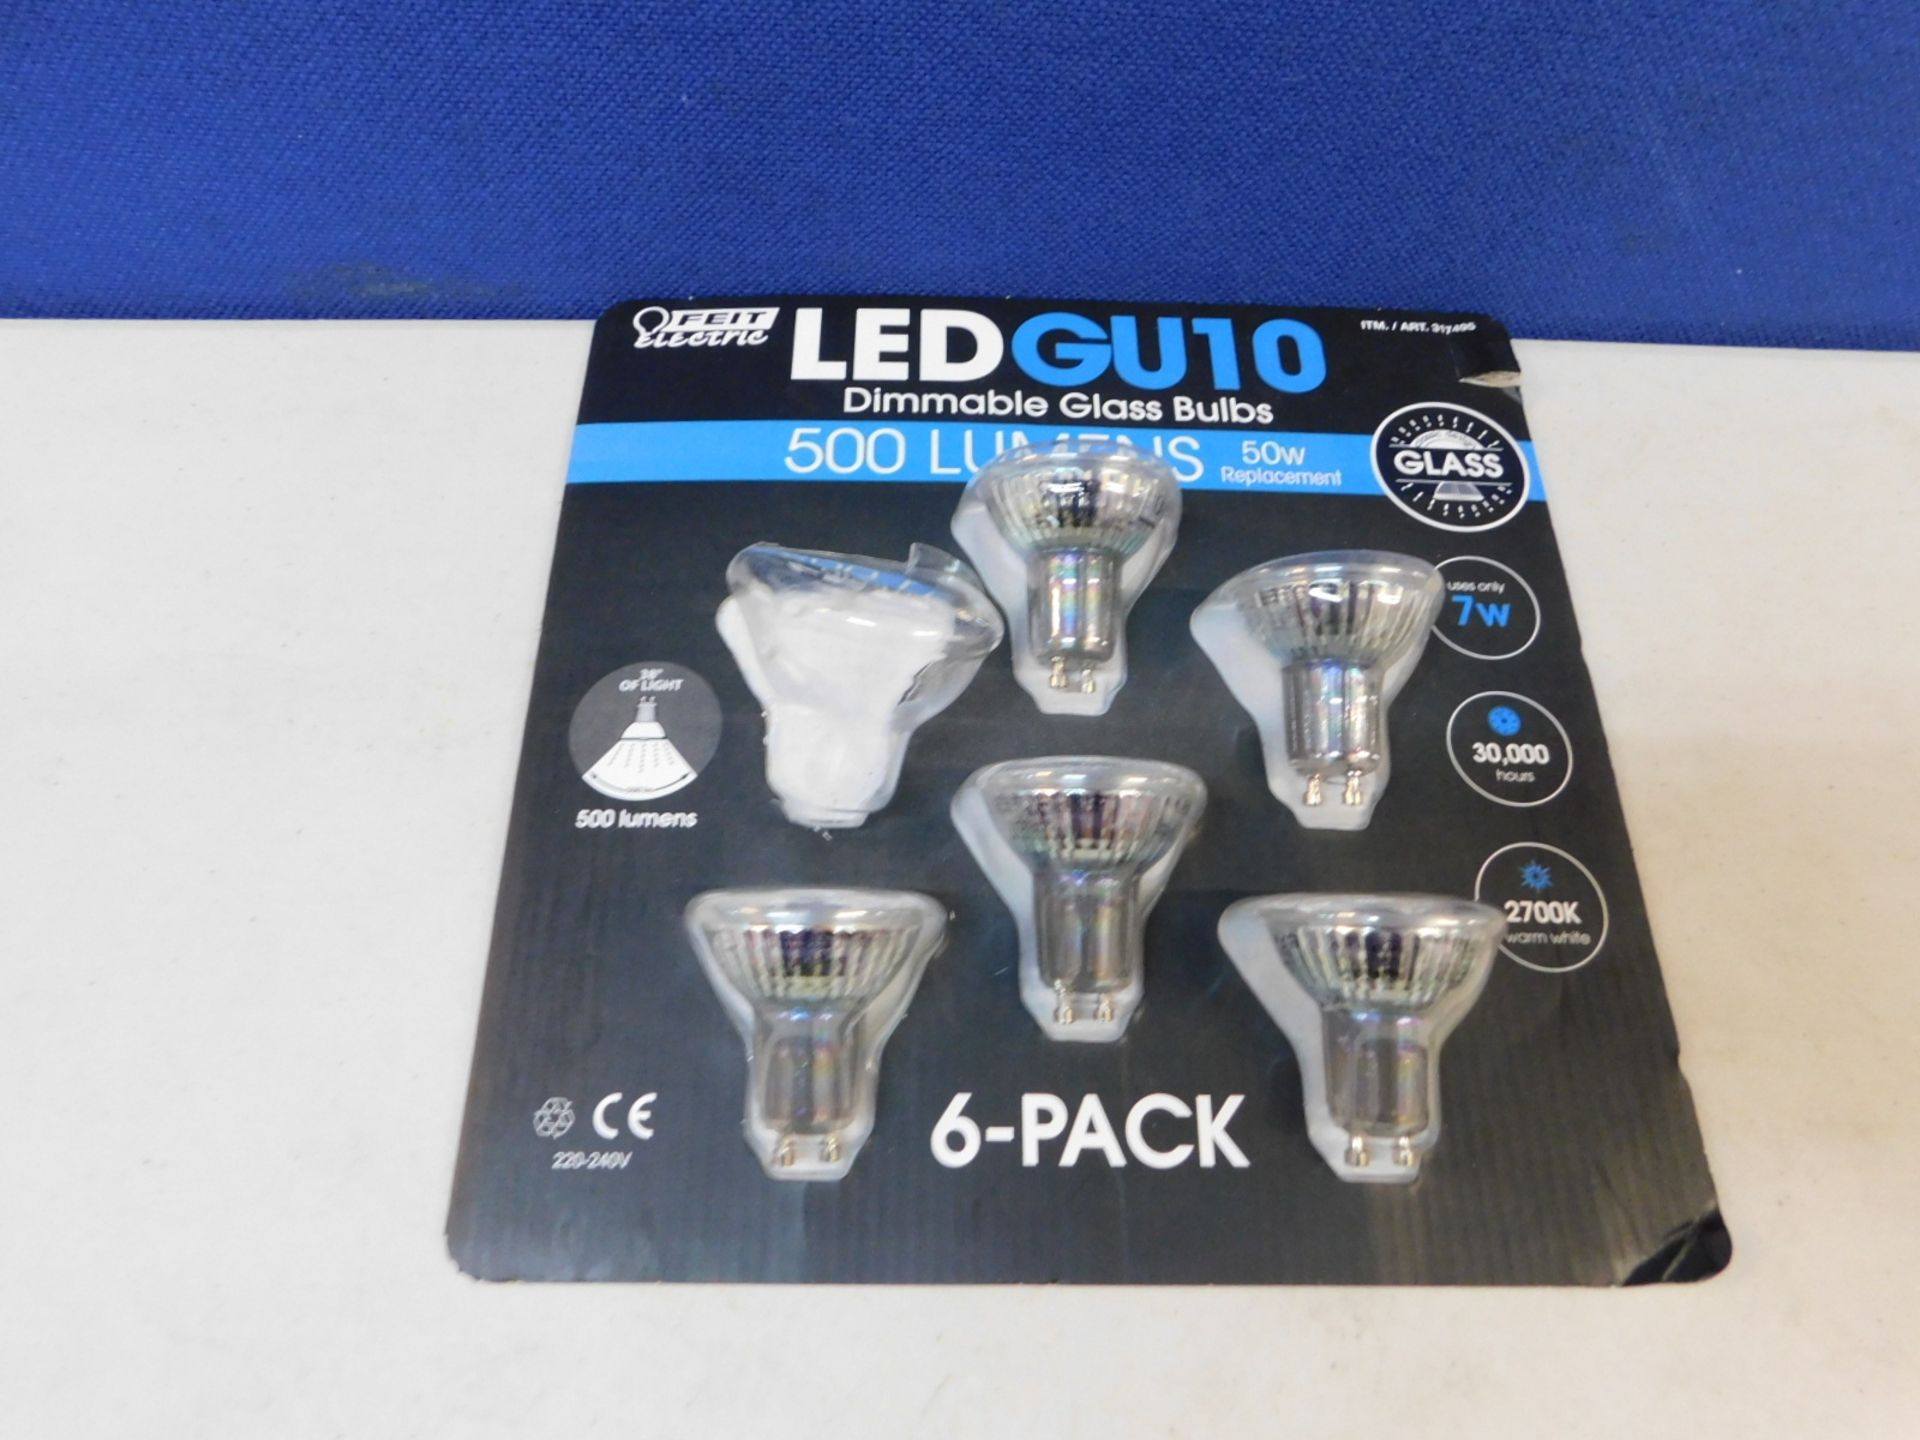 1 PACK OF 5 FEIT ELECTRIC GU10 LED DIMMABLE 50W REPLACEMENT BULBS RRP £29.99